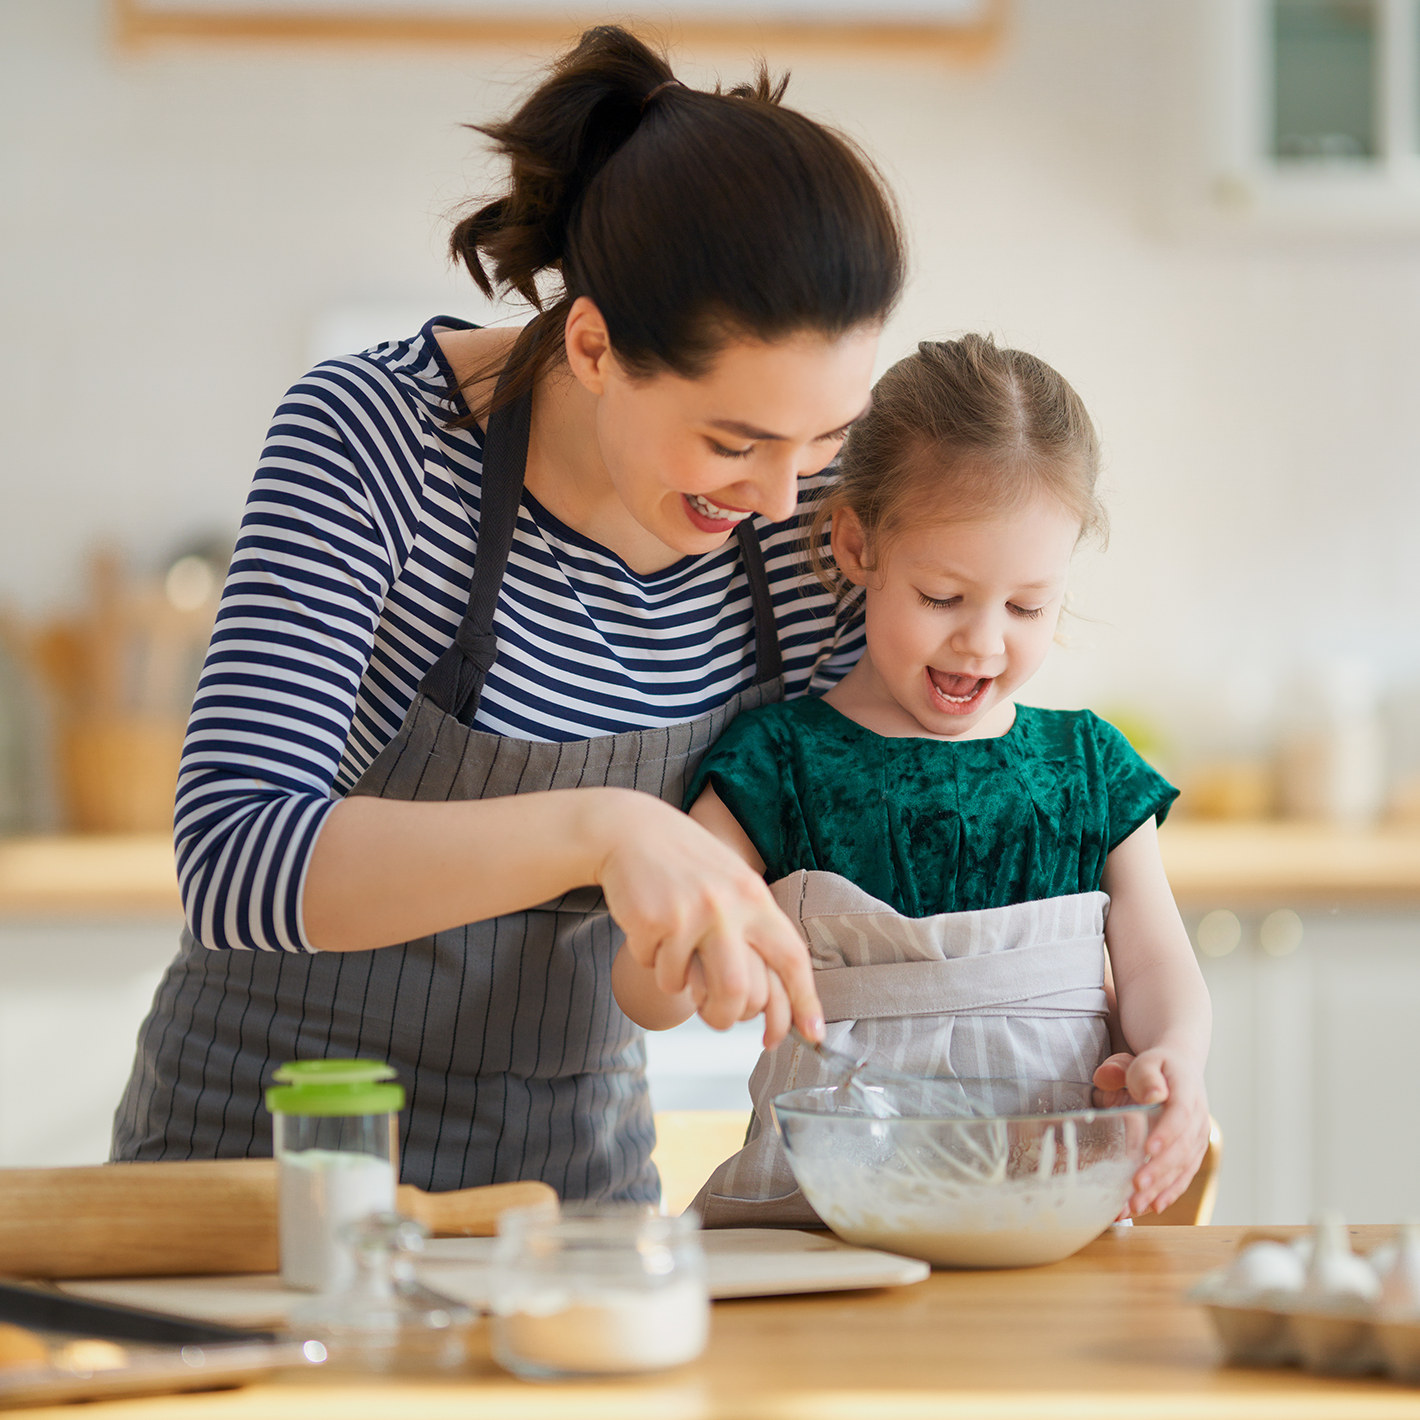 Woman and her daughter mixing something in a bowl in a kitchen while both are smiling.